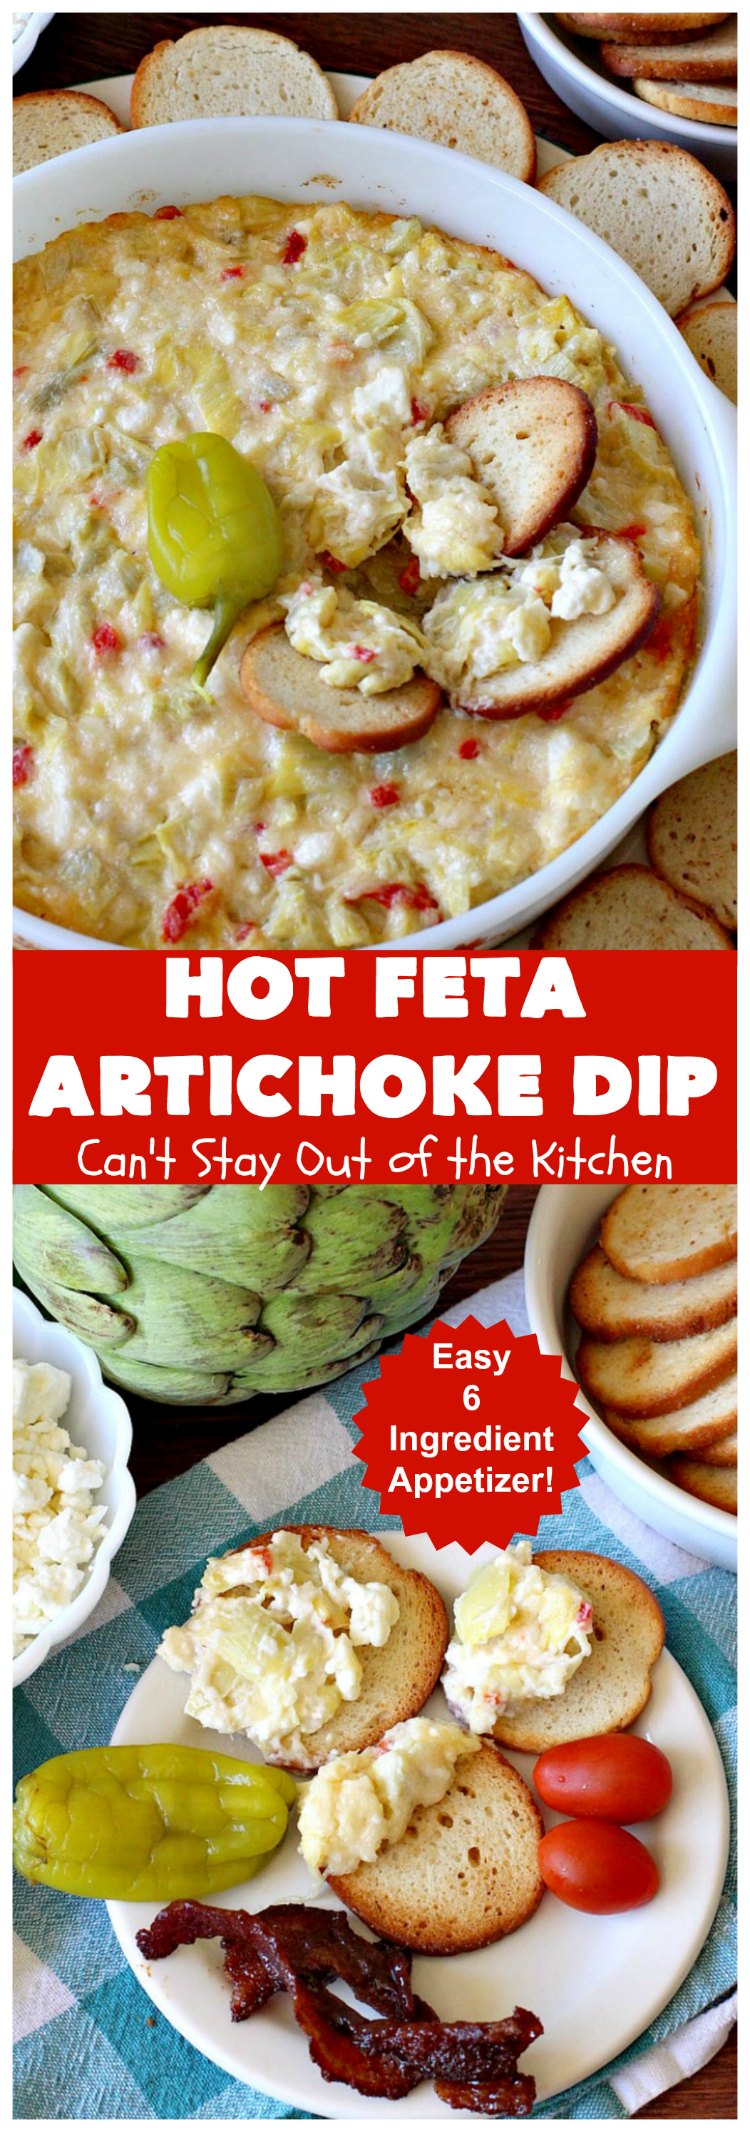 Hot Feta Artichoke Dip | Can't Stay Out of the Kitchen